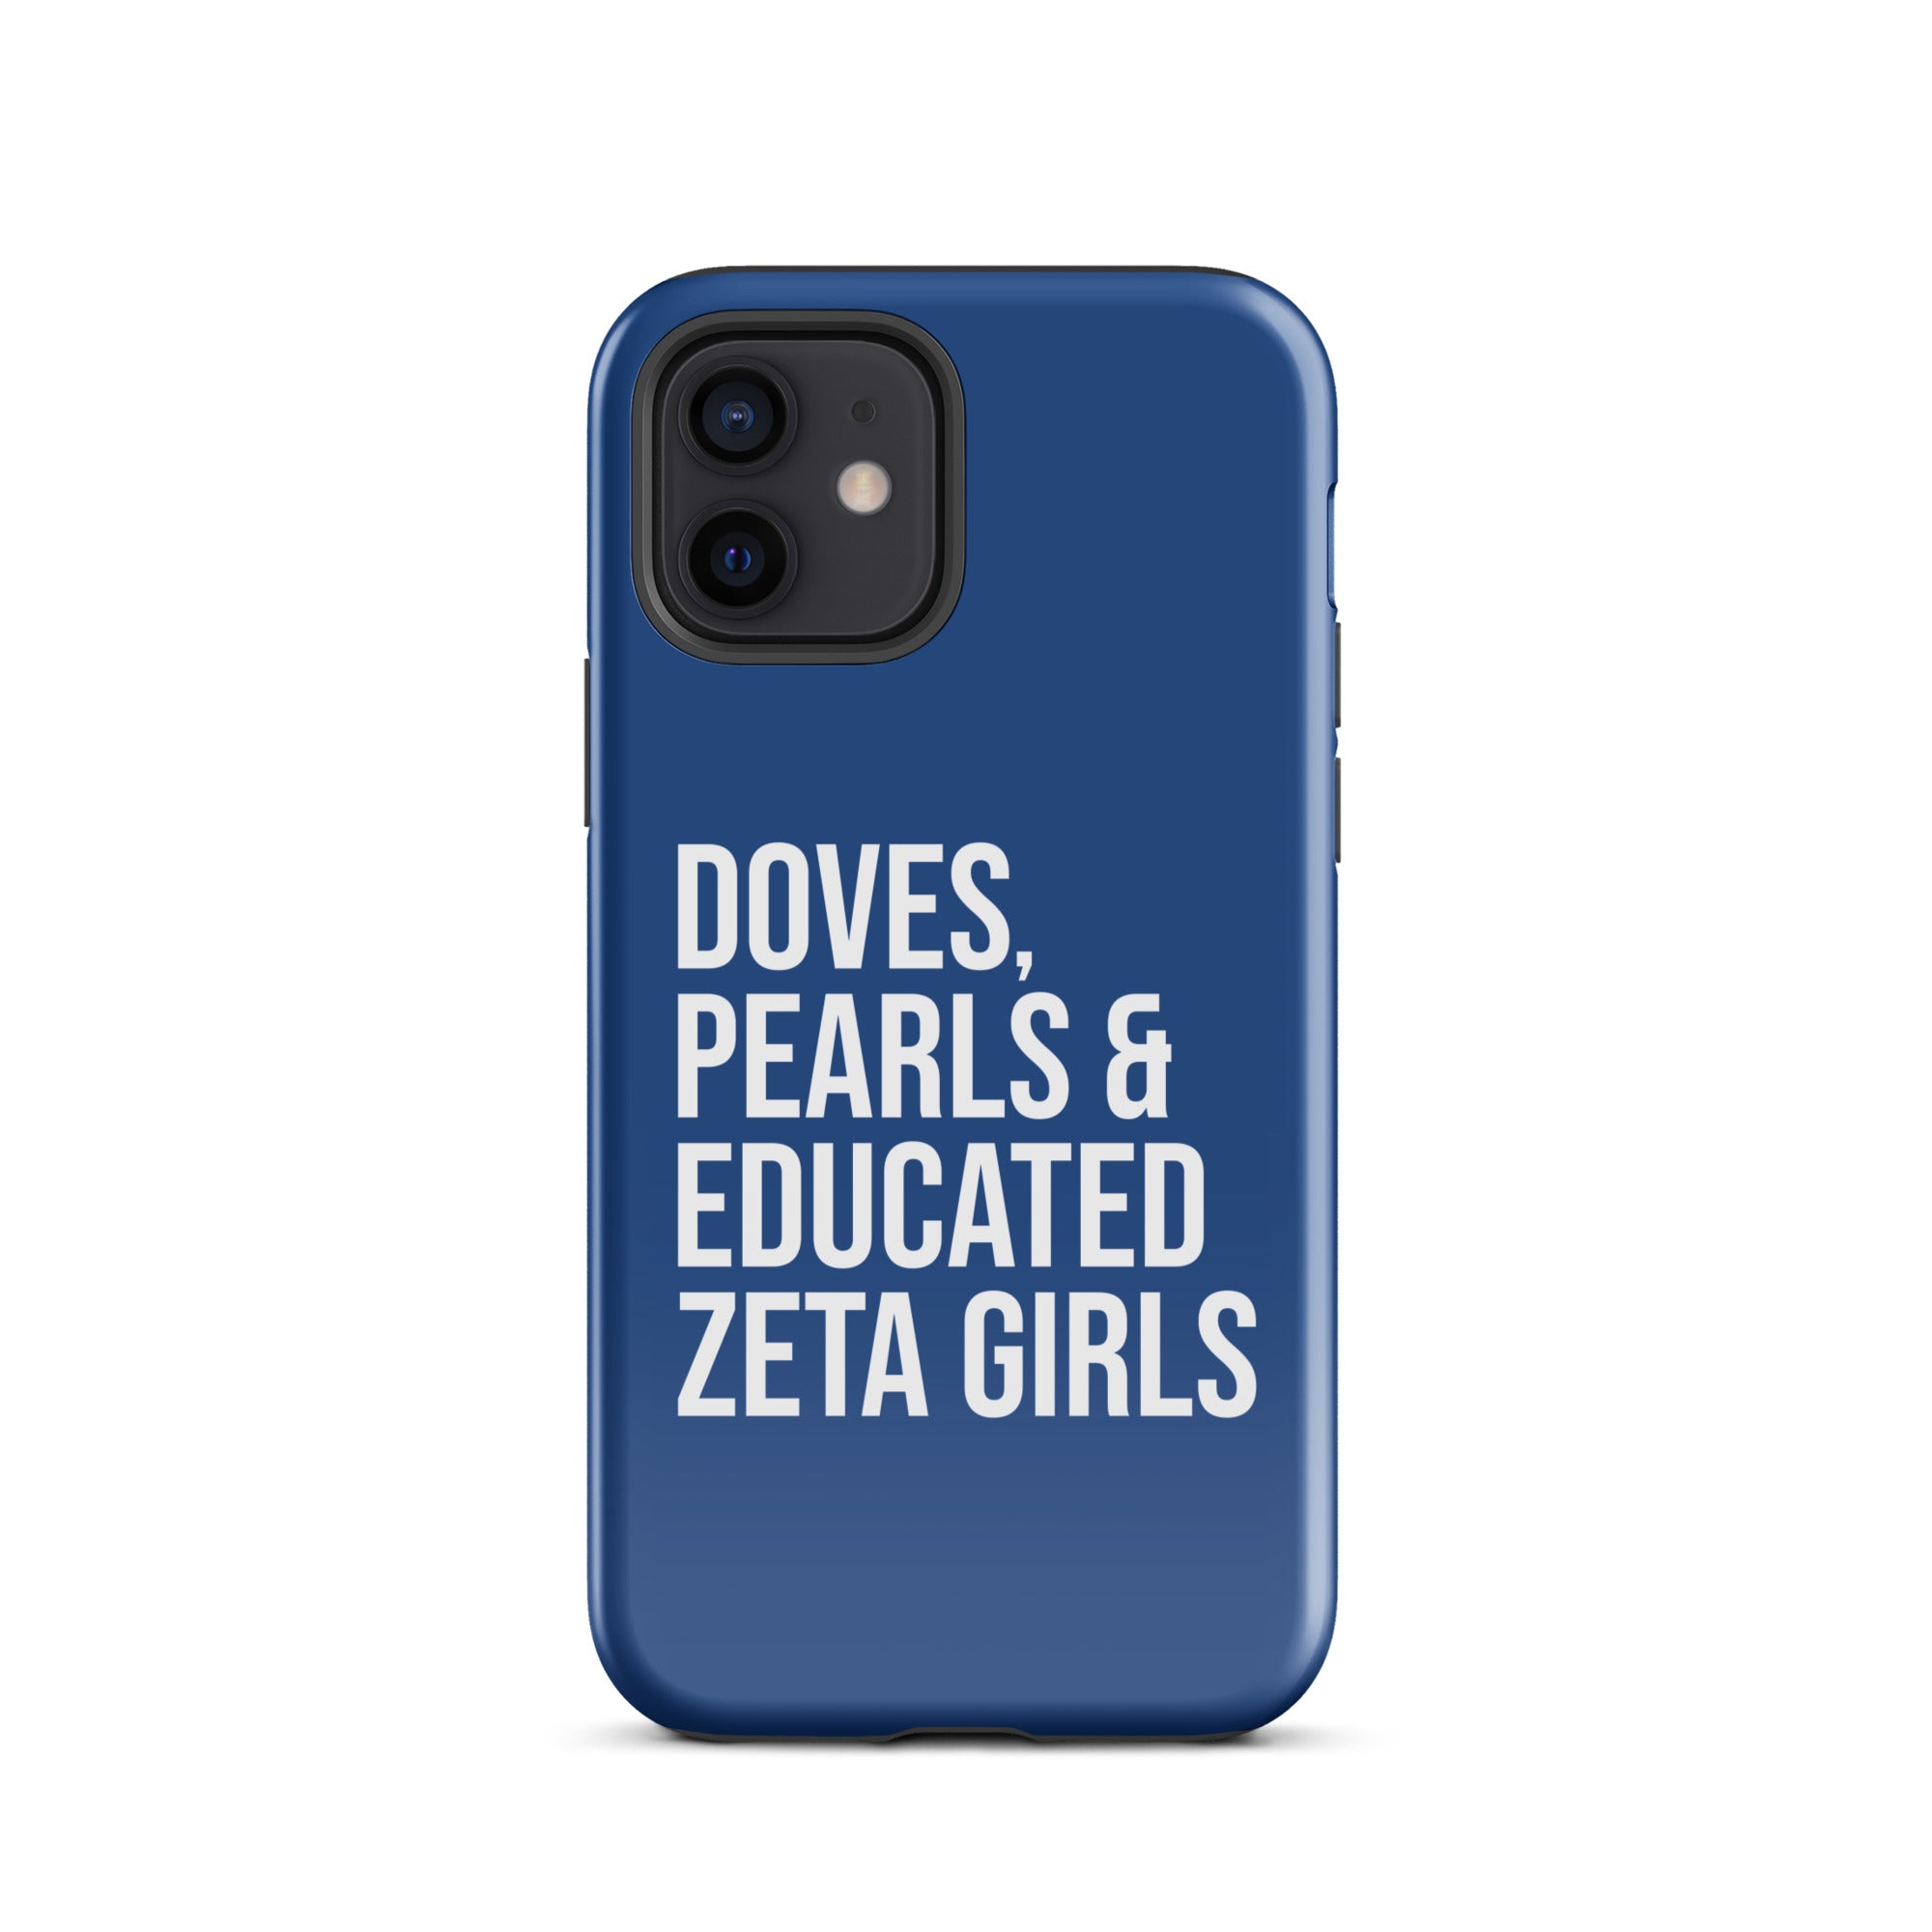 Doves Pearls & Educated Zeta Girls Tough Case for iPhone? - Blue